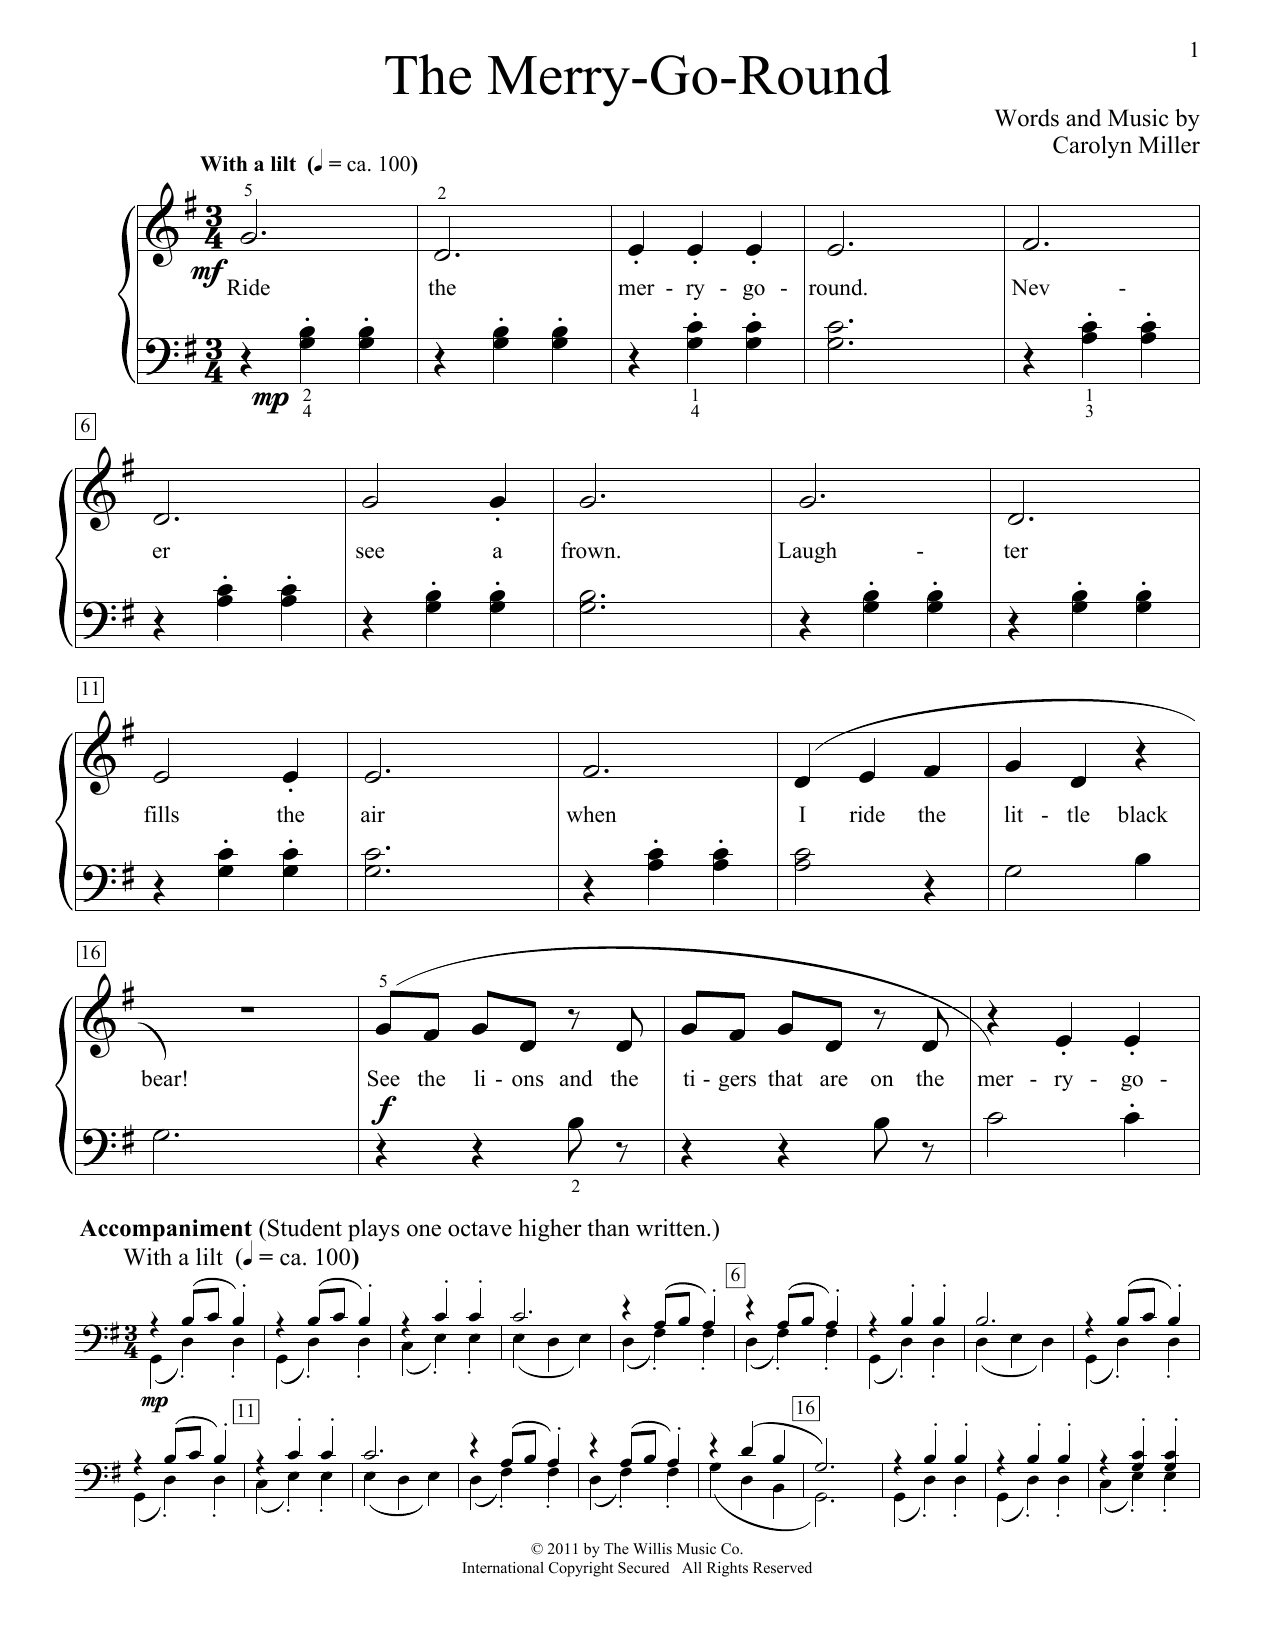 Download Carolyn Miller The Merry-Go-Round Sheet Music